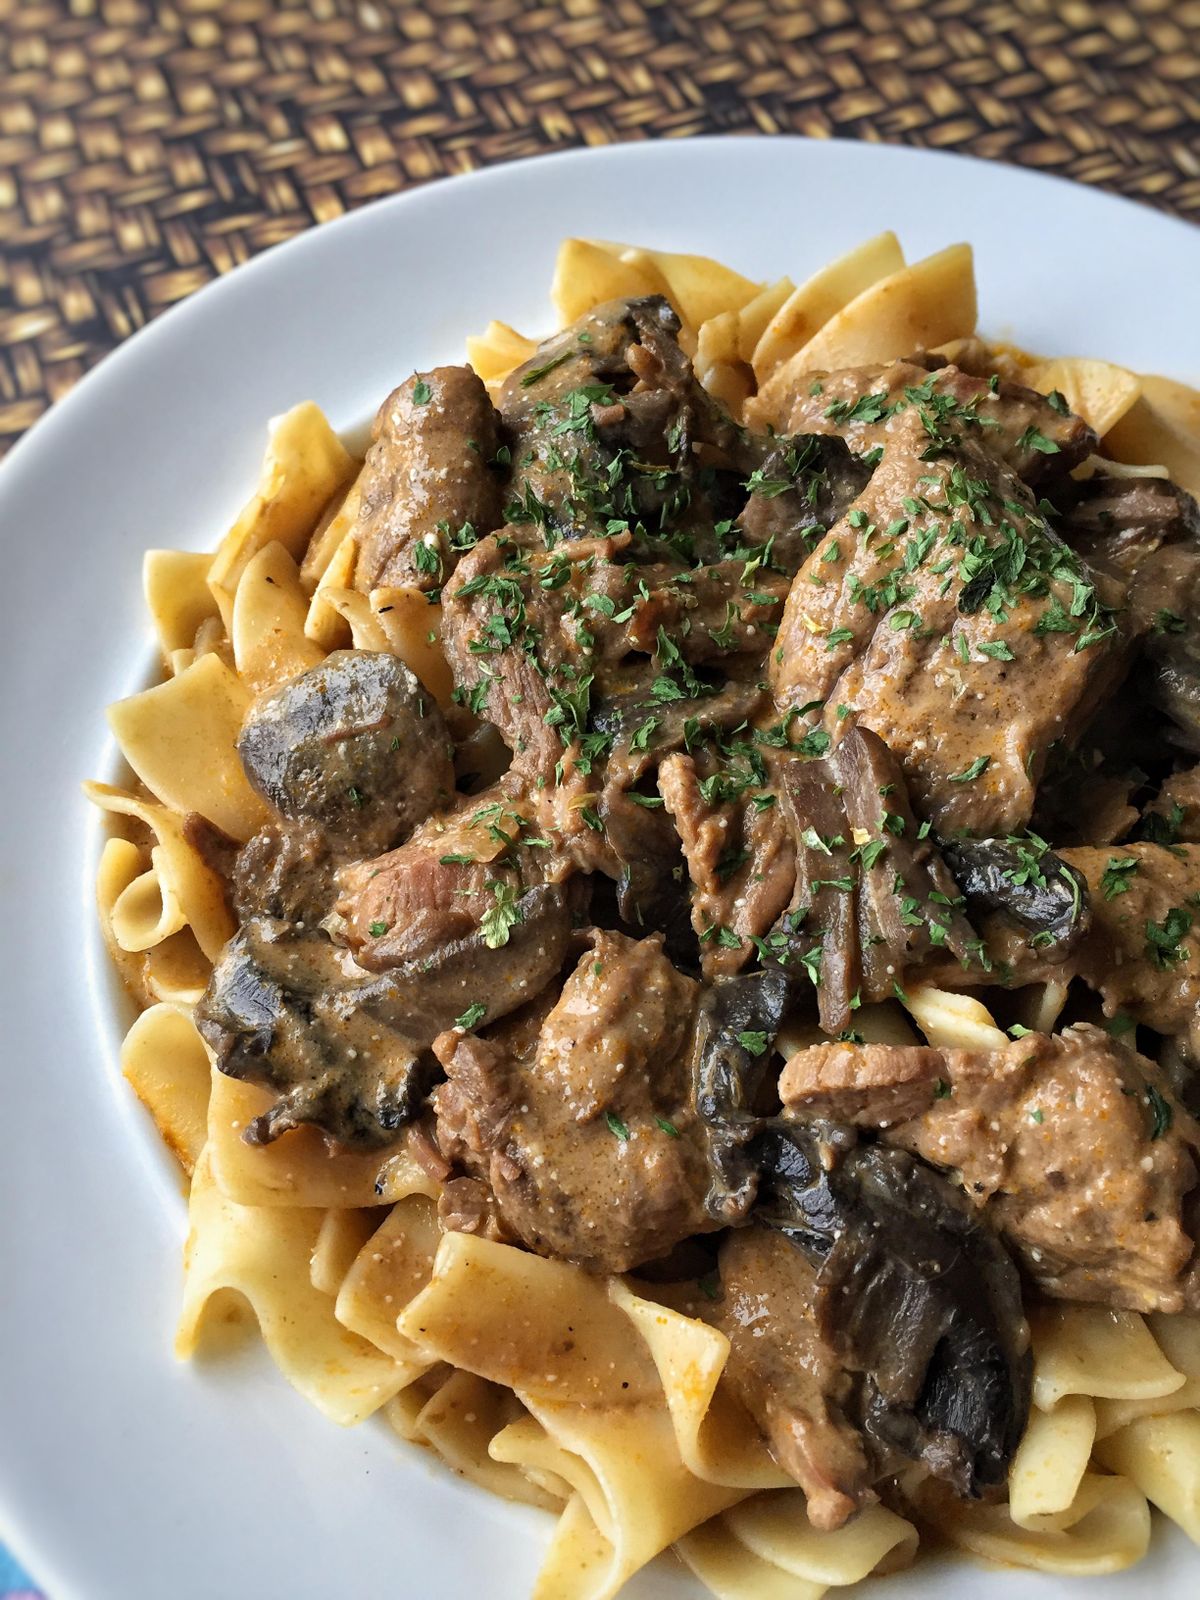 With tender chunks of beef, mushrooms in a creamy sauce and a bed of egg noodles, beef stroganoff epitomizes comfort food. (Audrey Alfaro)